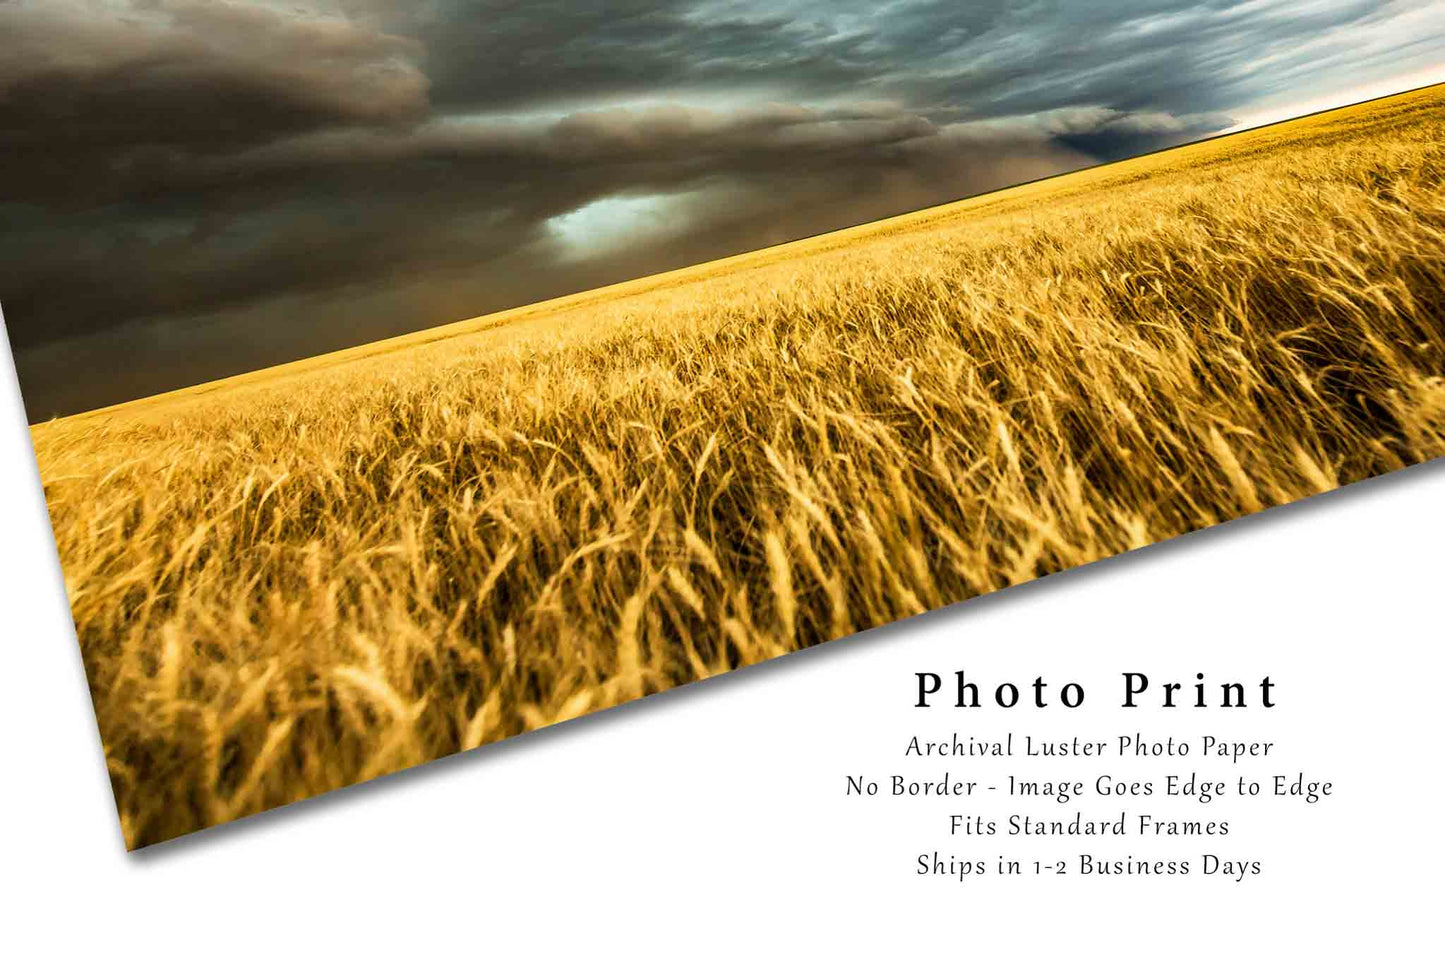 Storm Picture - Fine Art Landscape Photography Print of Thunderstorm Over Golden Wheat Field in Colorado Farm Weather Wall Photo Decor